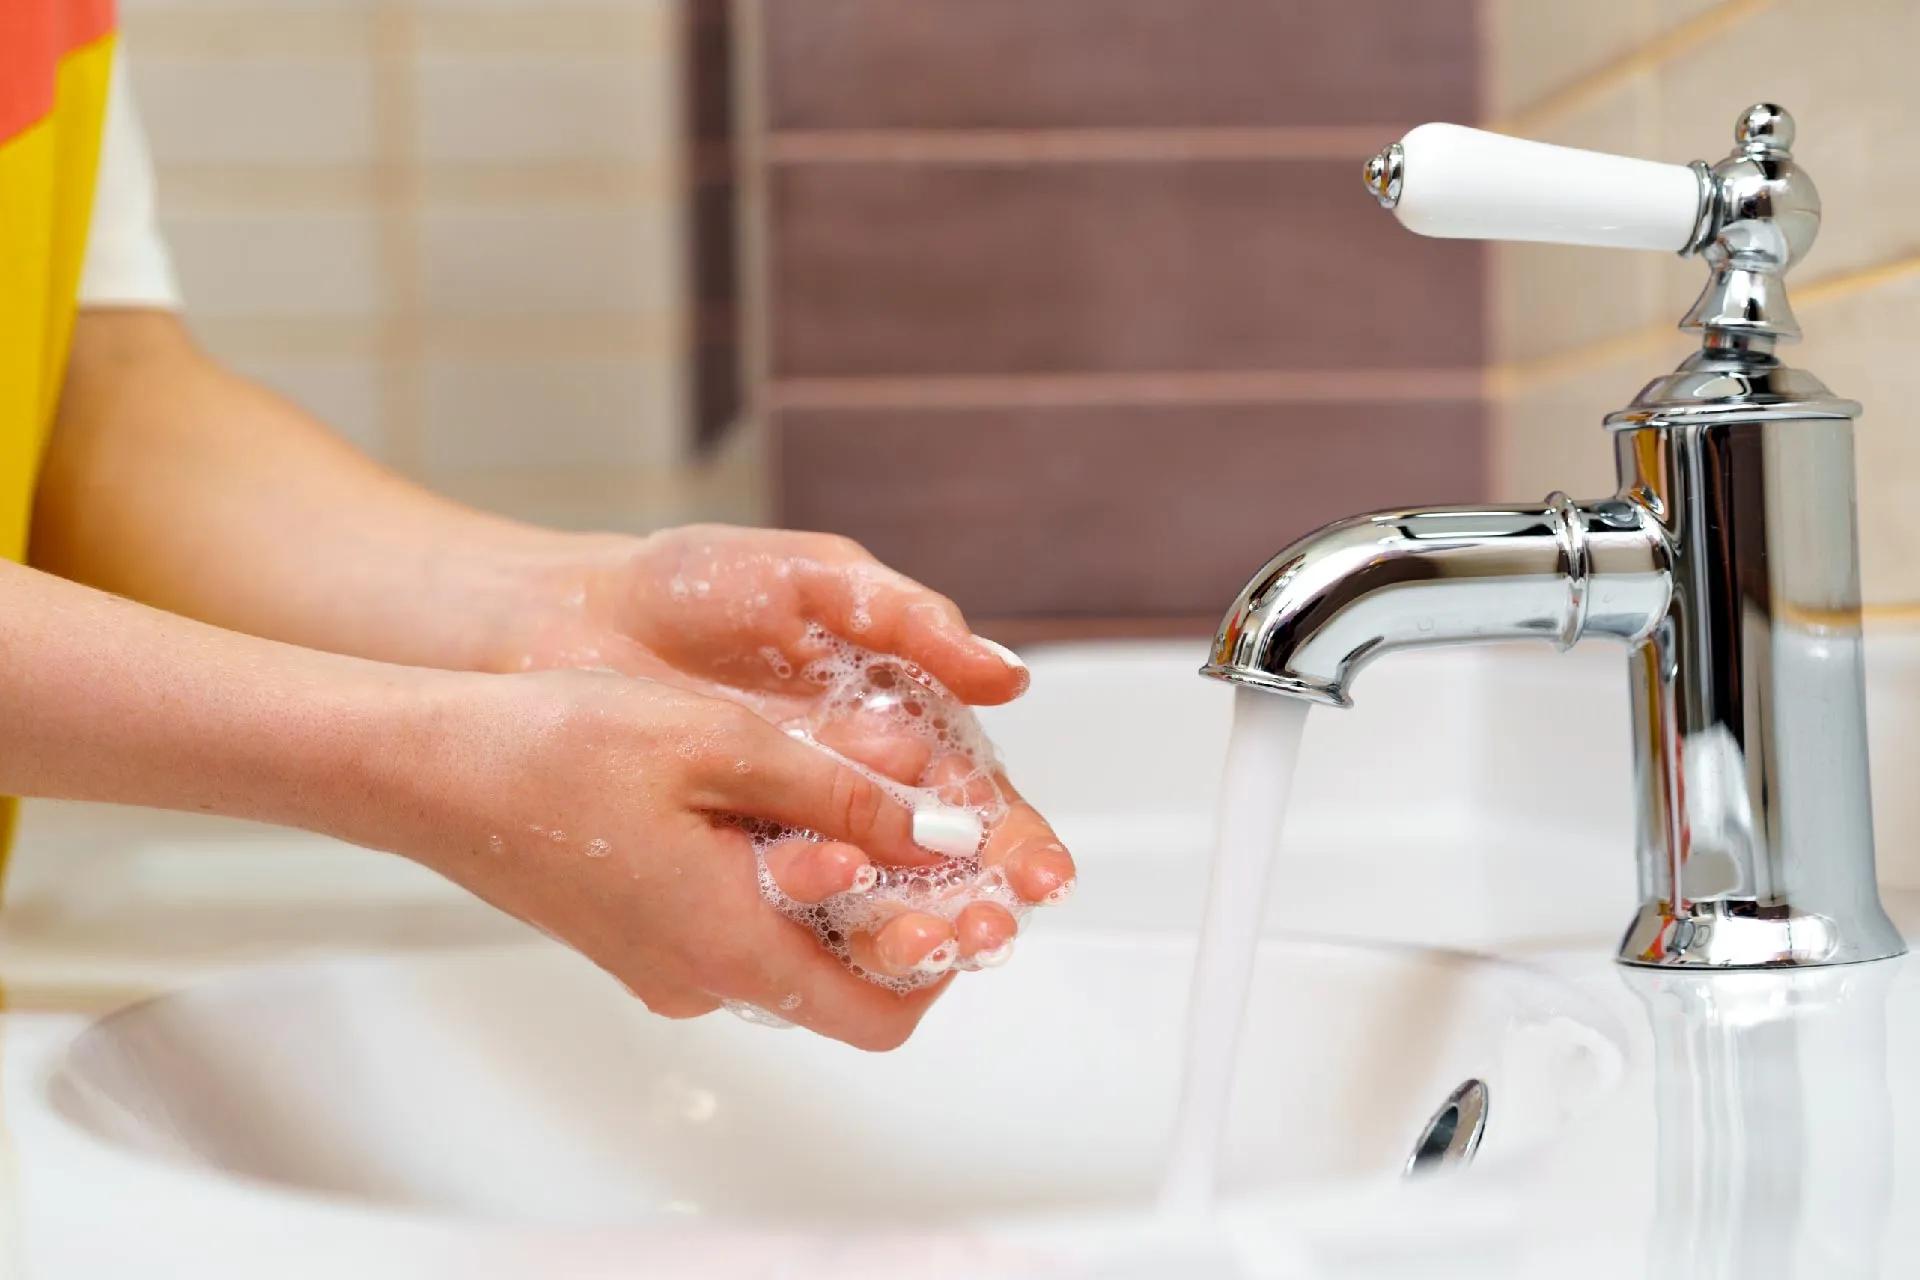 Hand Washing Steps: How to Wash Your Hands Properly